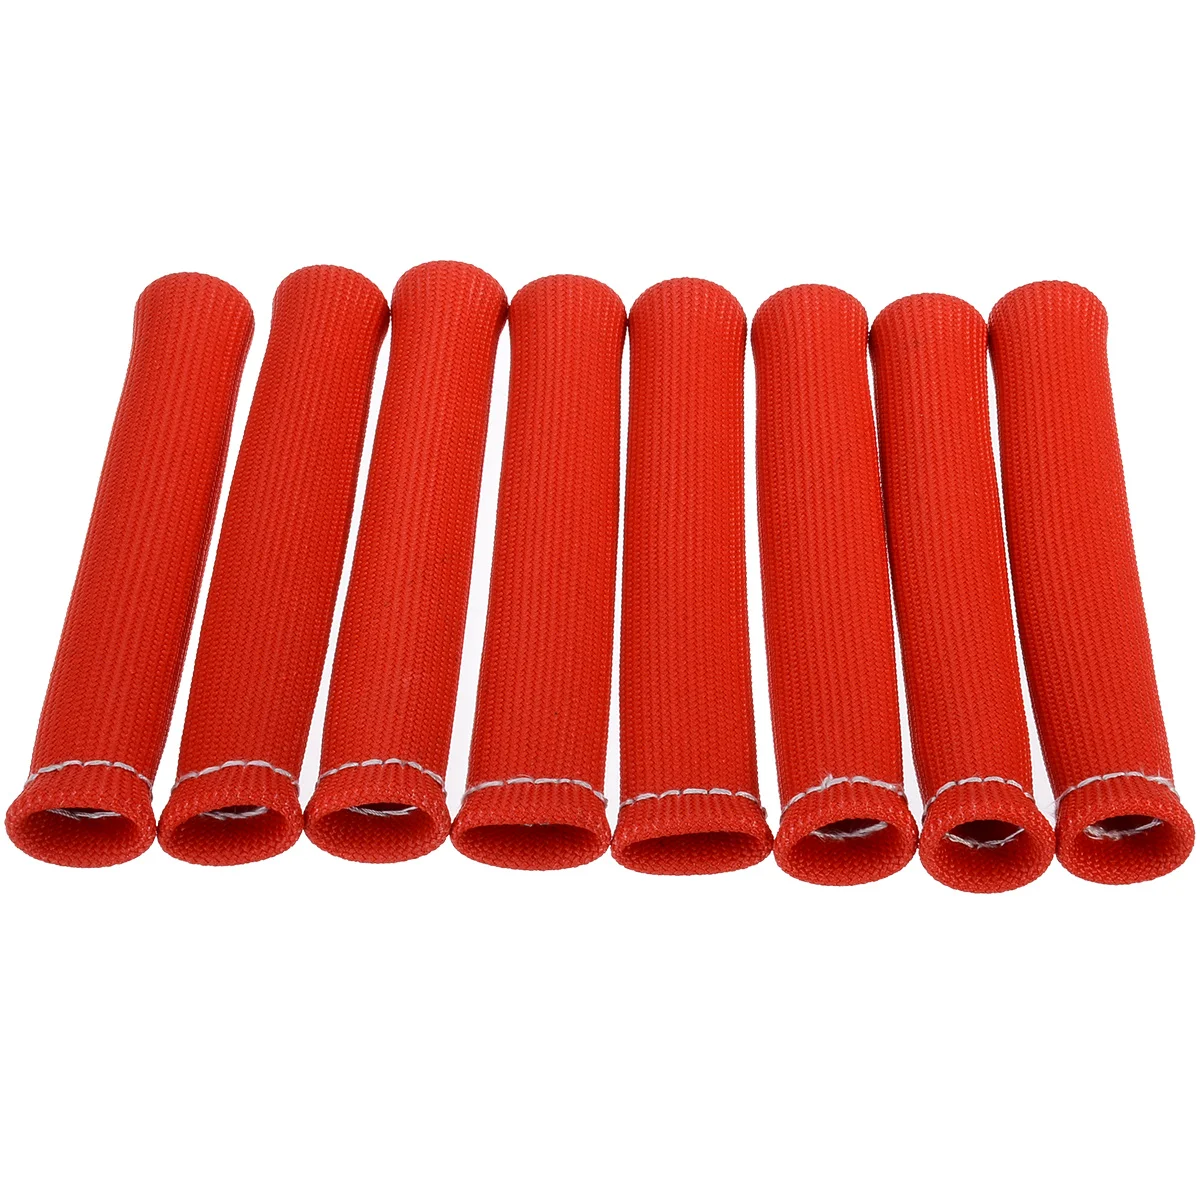 yjracing Red 8Pcs 1200 Degree Spark Plug Wire Boots Heat Shield Protector Sleeve Fit for SBC BBC 